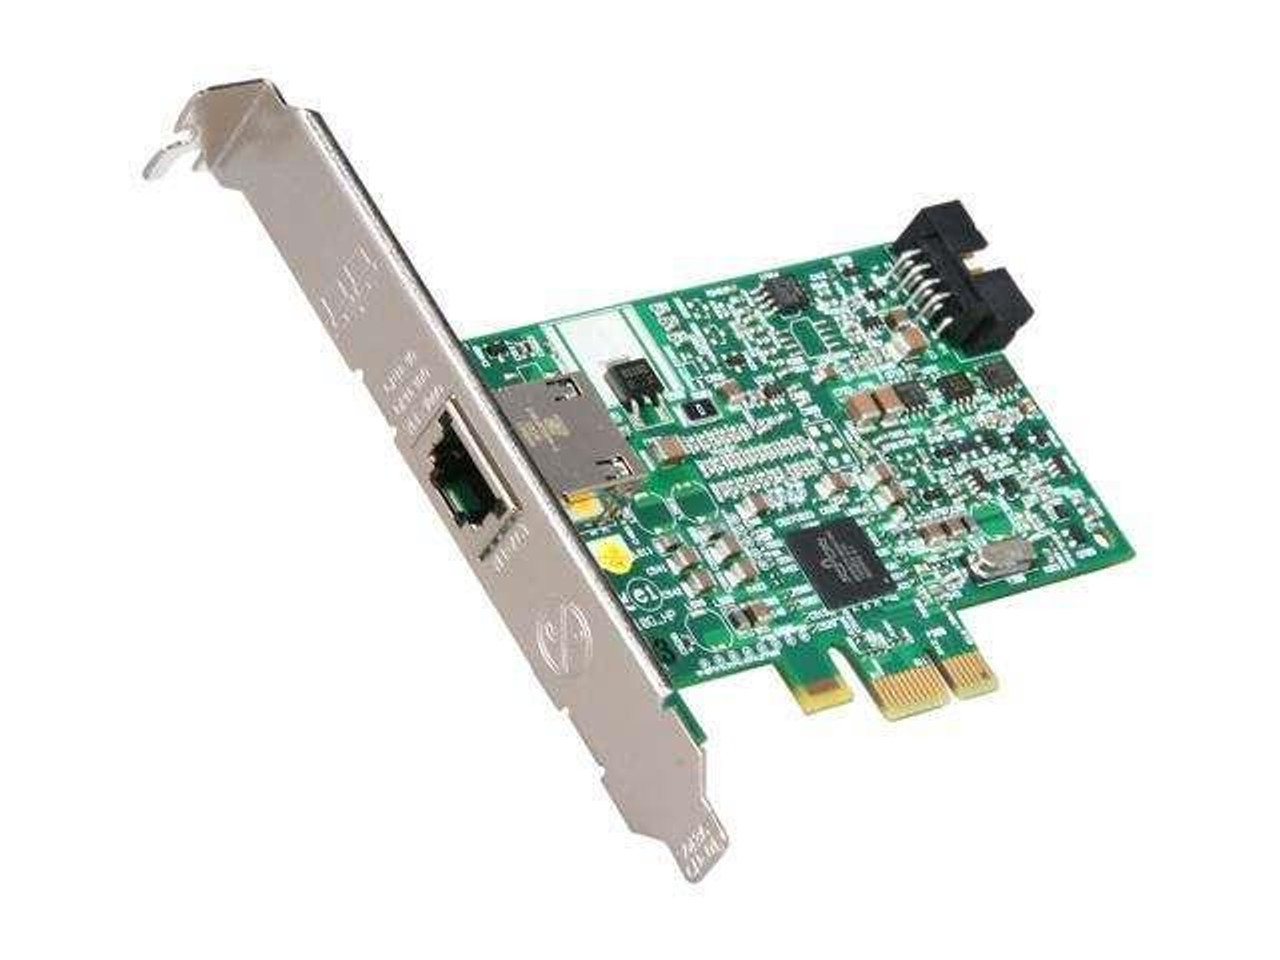 FS215AA-ACC Accortec Single-Port RJ-45 1Gbps 10Base-T/100Base-TX/1000Base-T Gigabit Ethernet PCI Express Network Adapter for HP Compatible